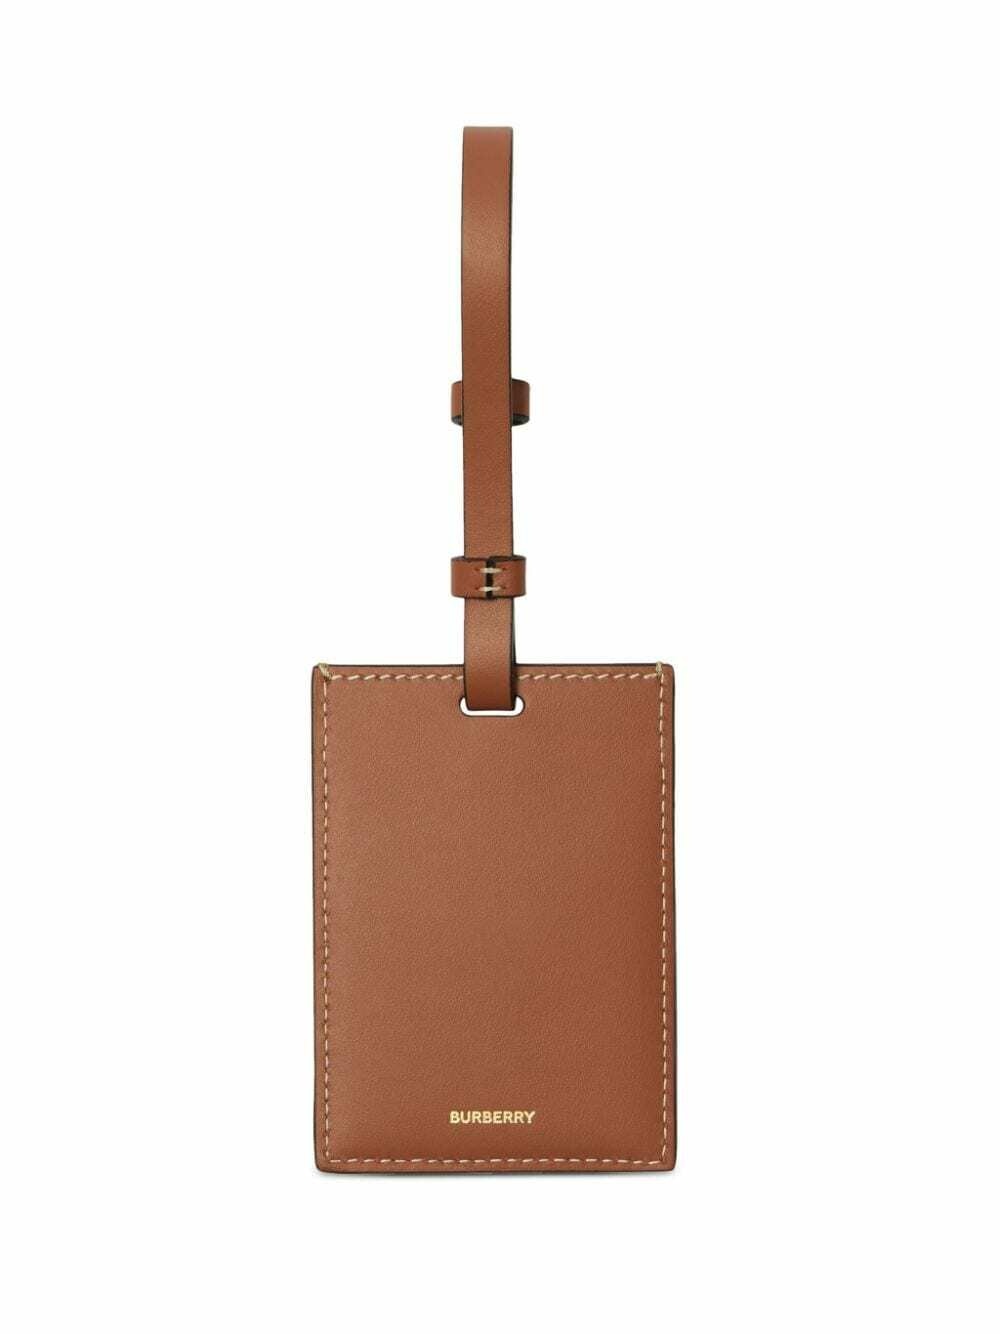 BURBERRY - Check Motif Leather Luggage Tag